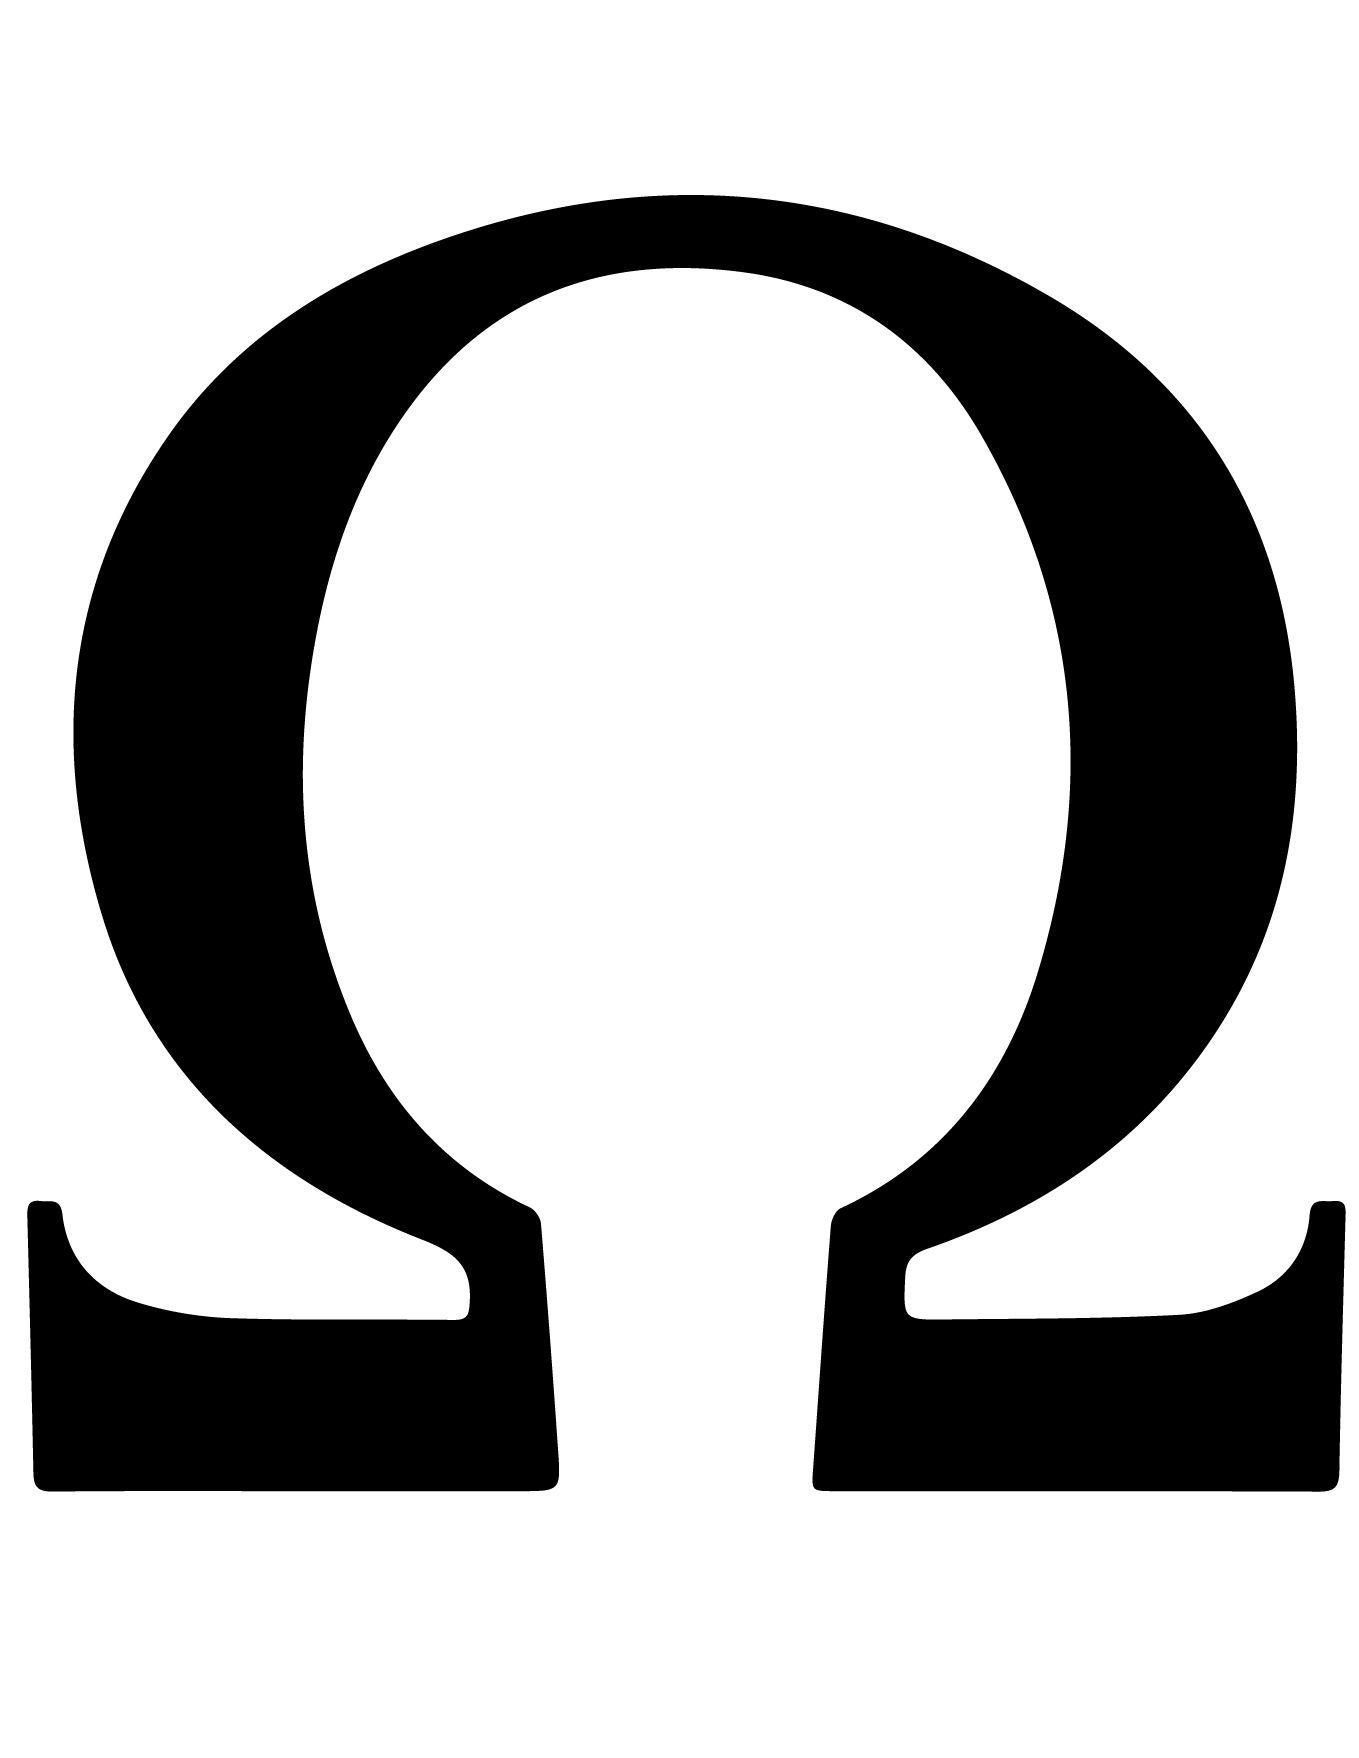 Omega Logo - Omega Symbol Sign And Its Meaning